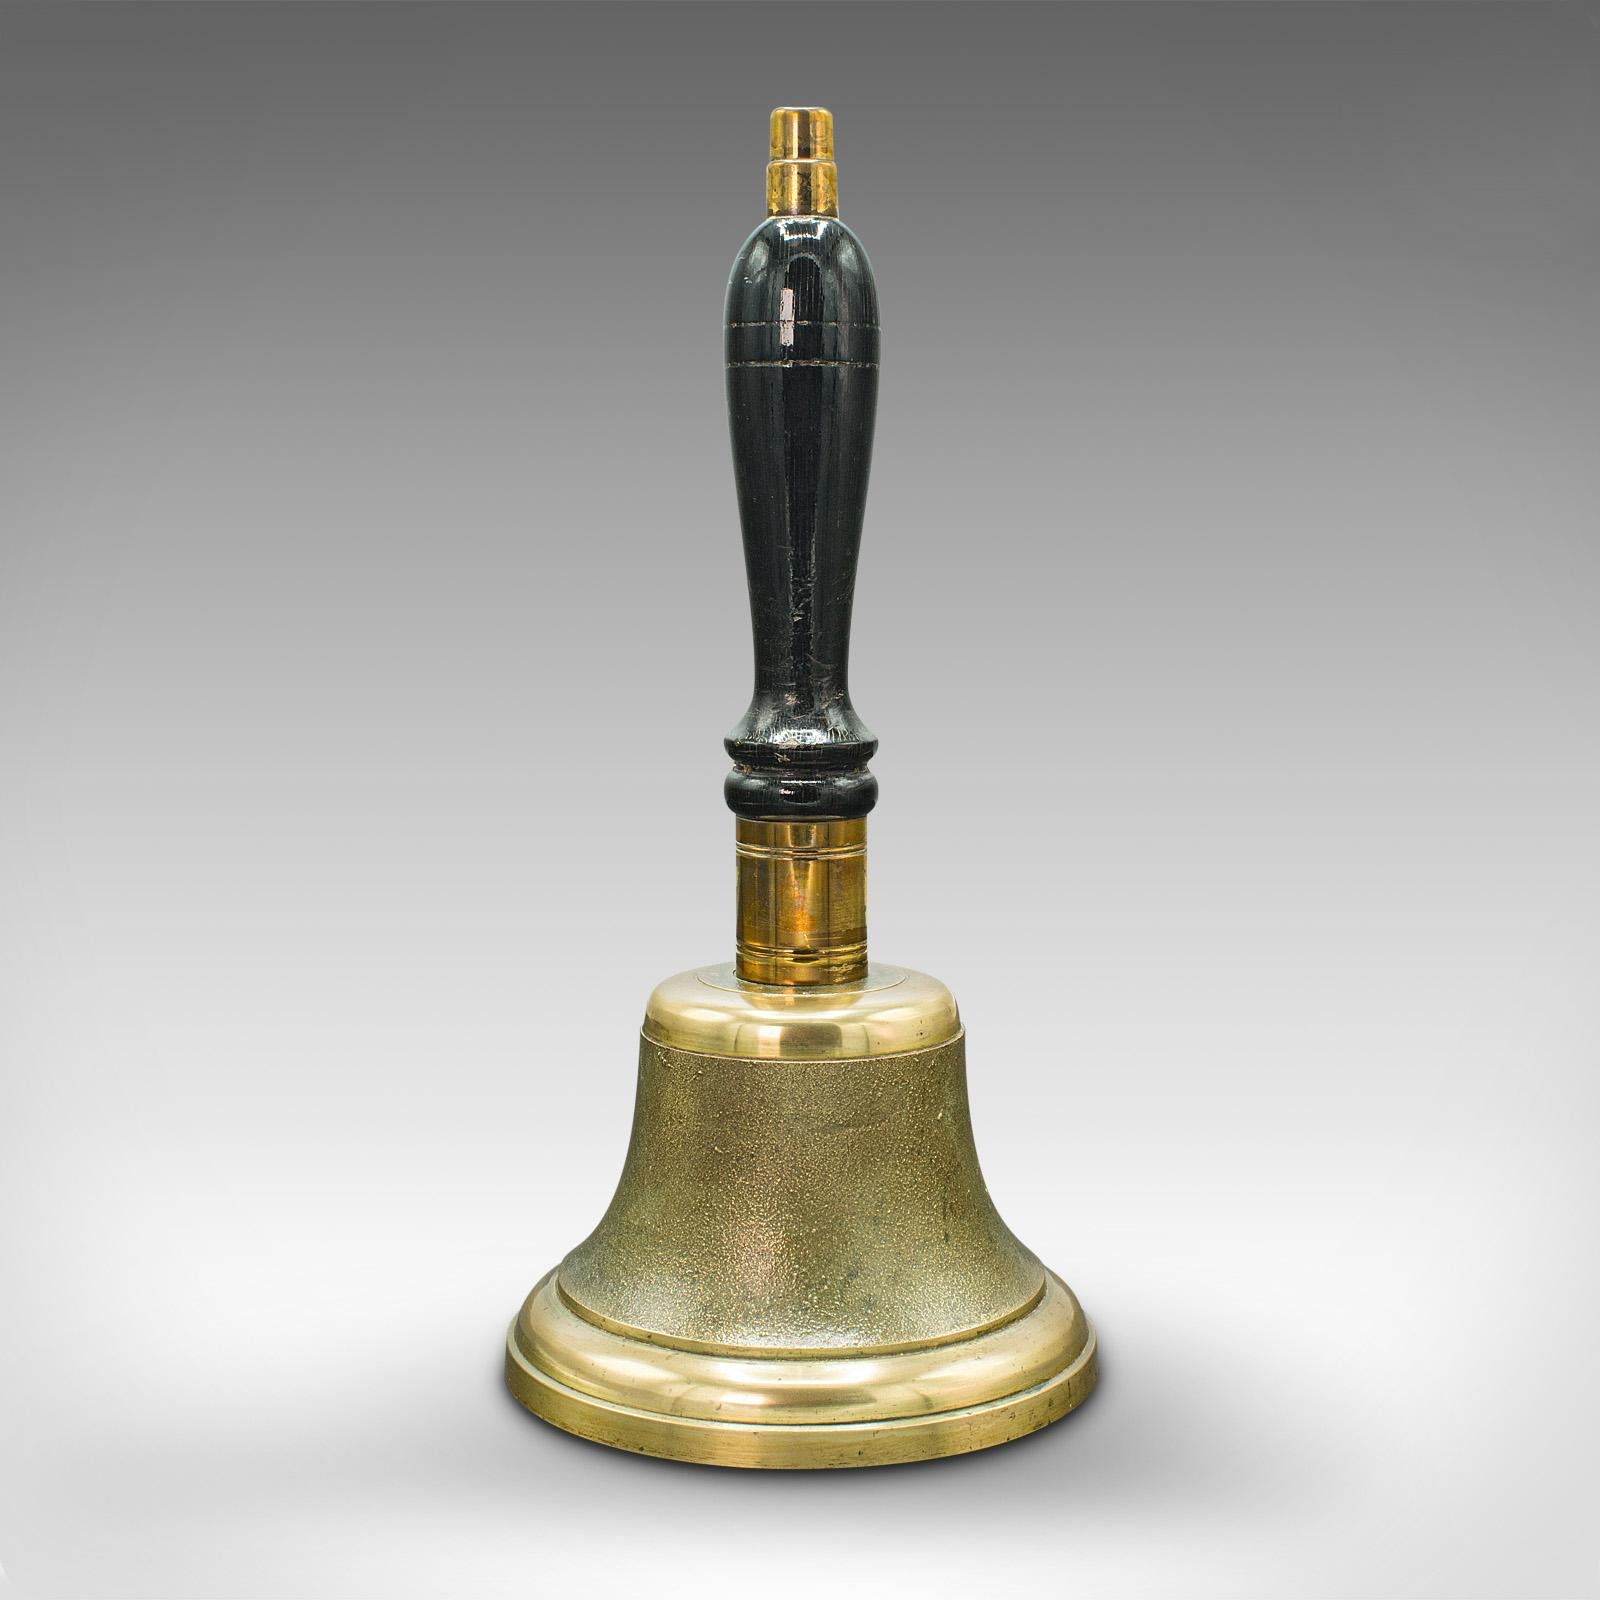 This is an antique town clerk's hand bell. An English, brass and mahogany school yard ringer, dating to the Edwardian period, circa 1910.

Delightfully presented hand bell, with decorative appeal
Displays a desirable aged patina and in good